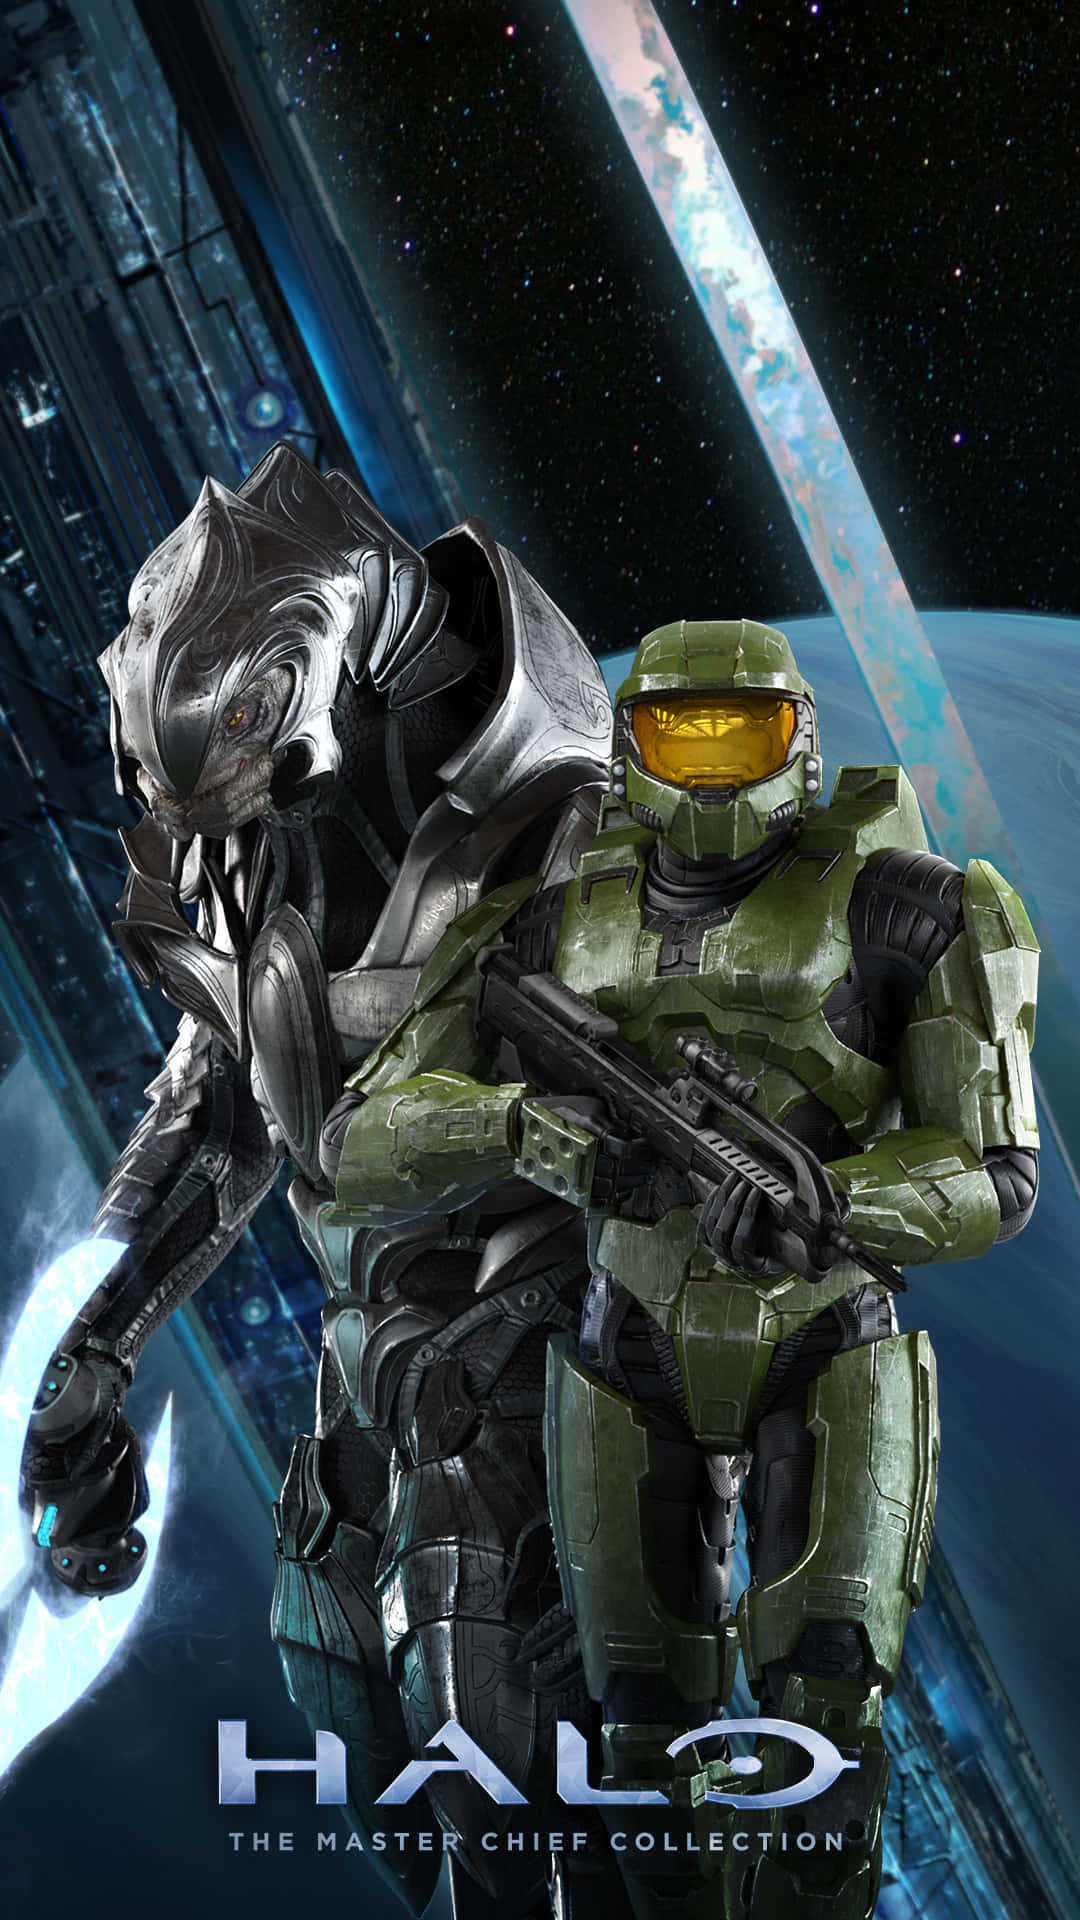 Halo The Master Chief Collection - Halo The Master Chief Collection Wallpaper